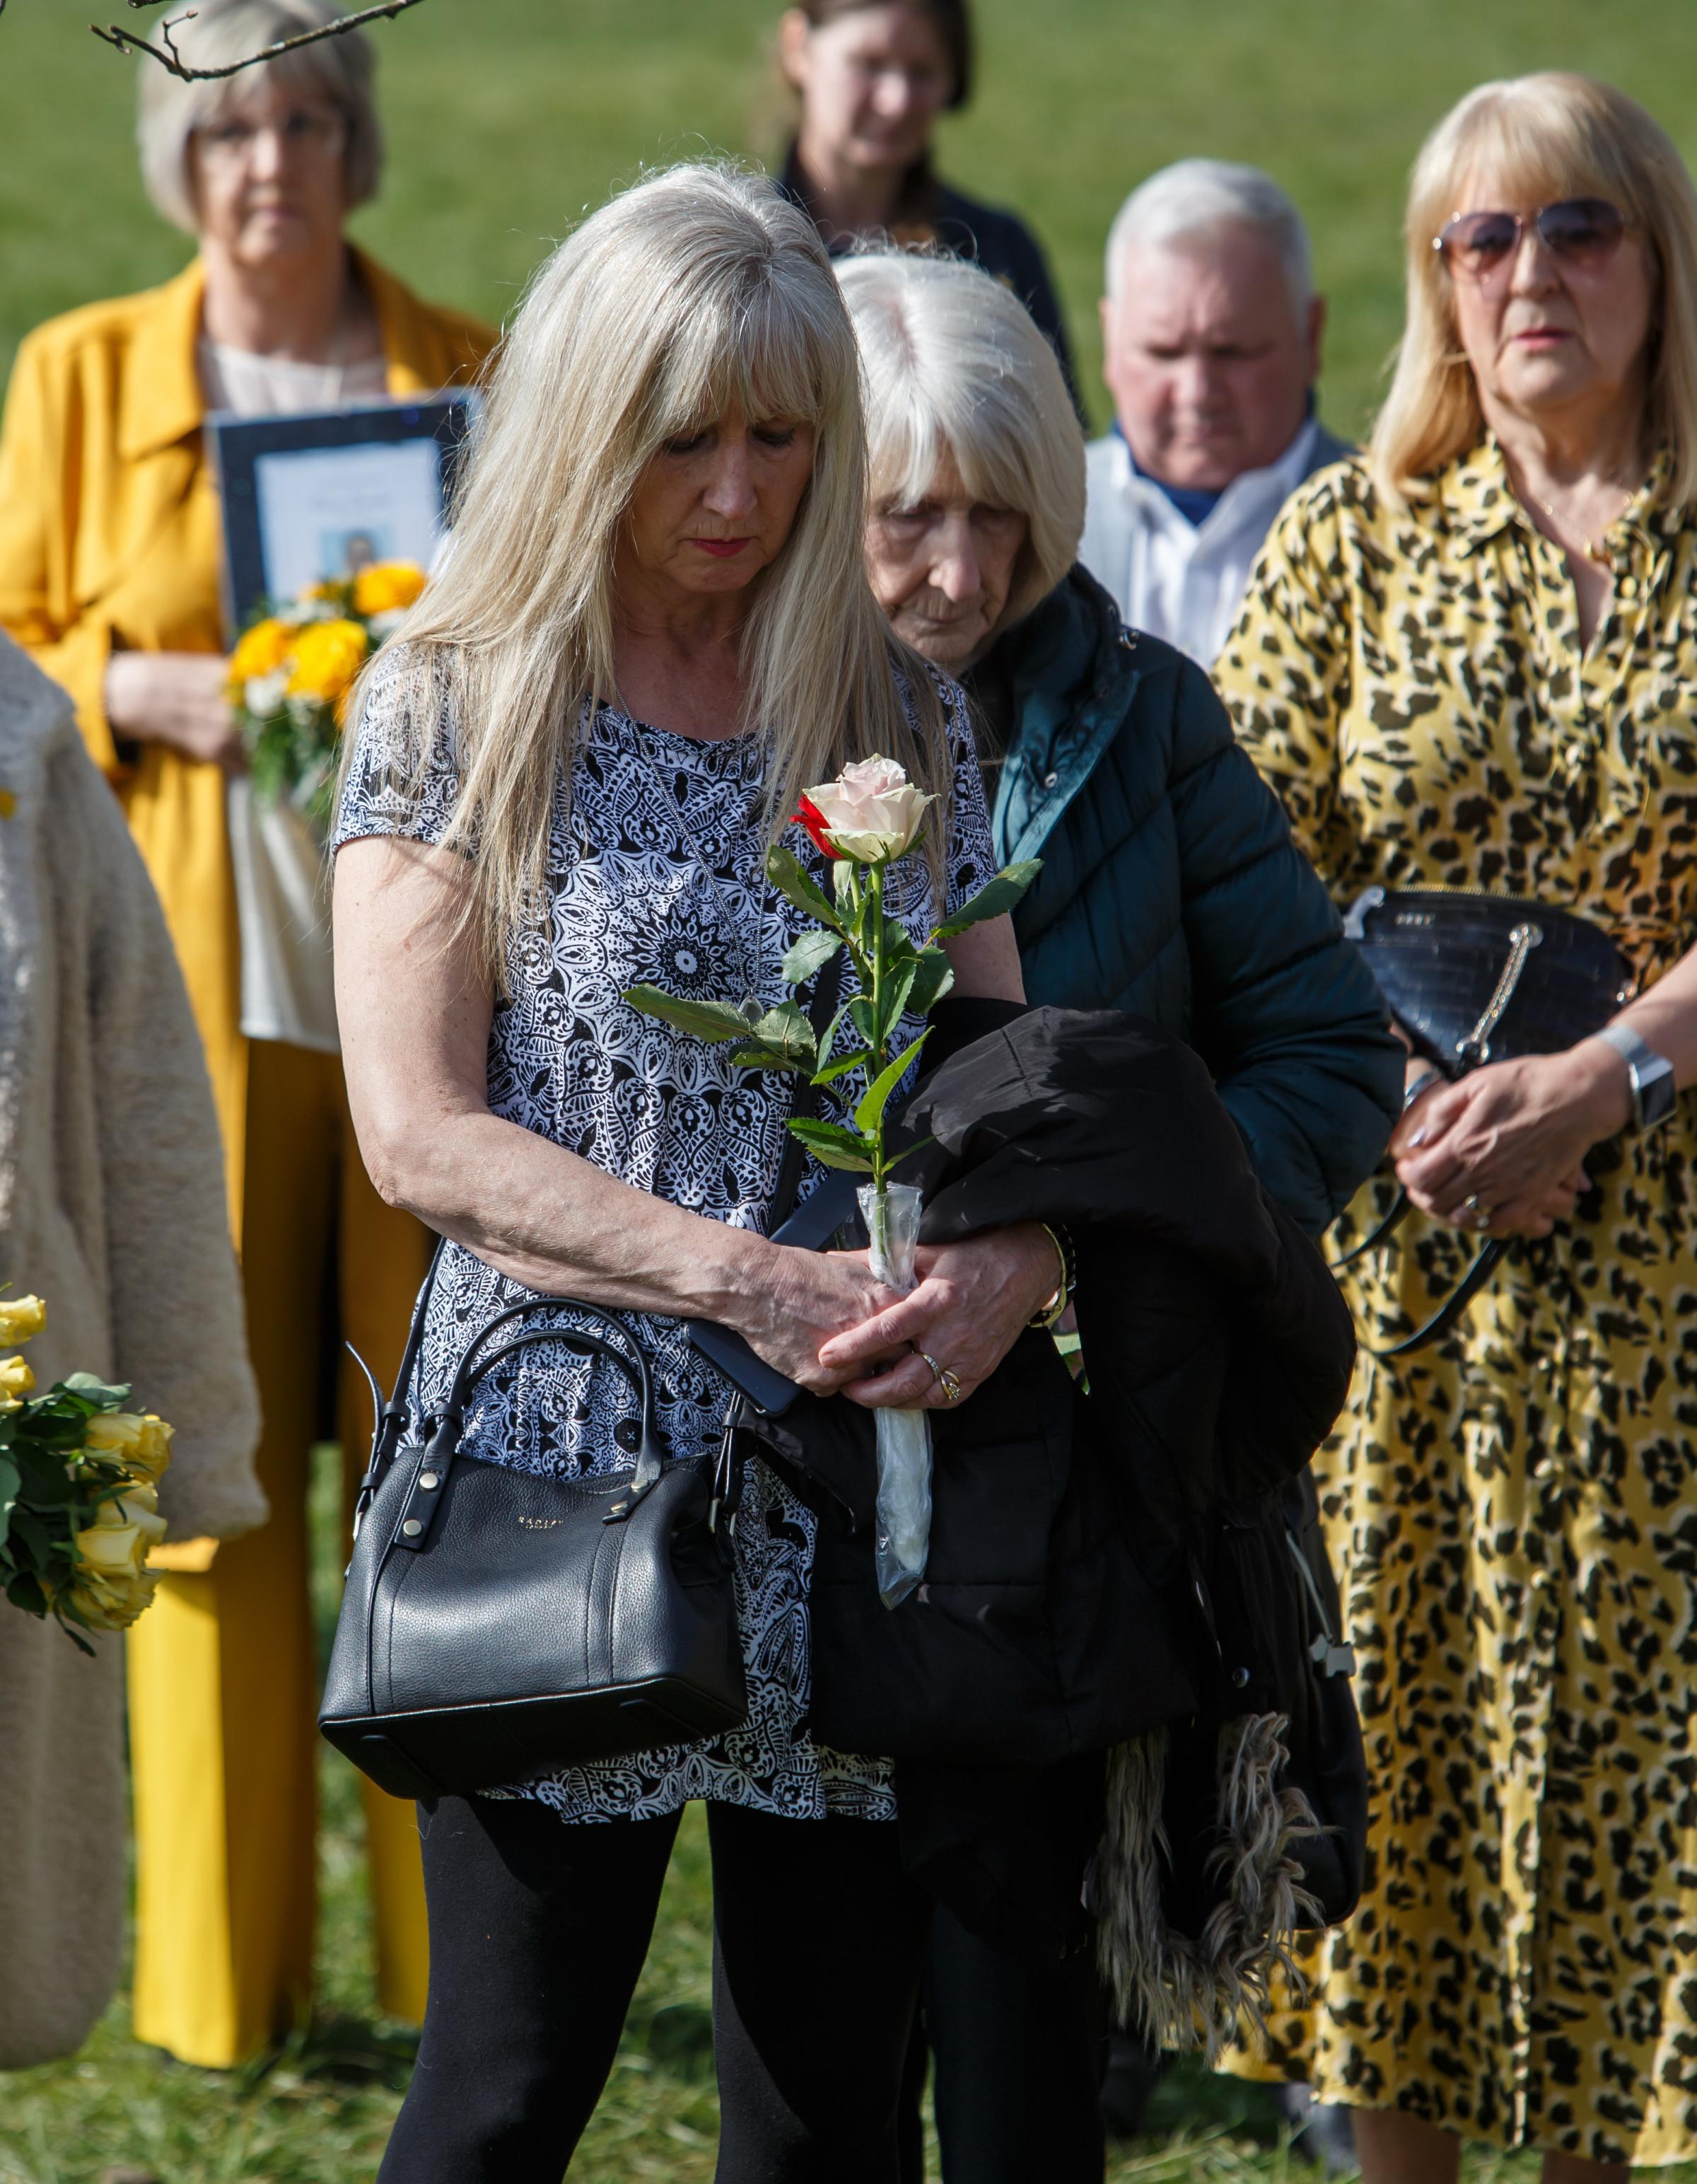 People pictured during a minutes silence for those lost to Covid at Riverside Grove in Pollok Country Park in Glasgow. Photograph by Colin Mearns.